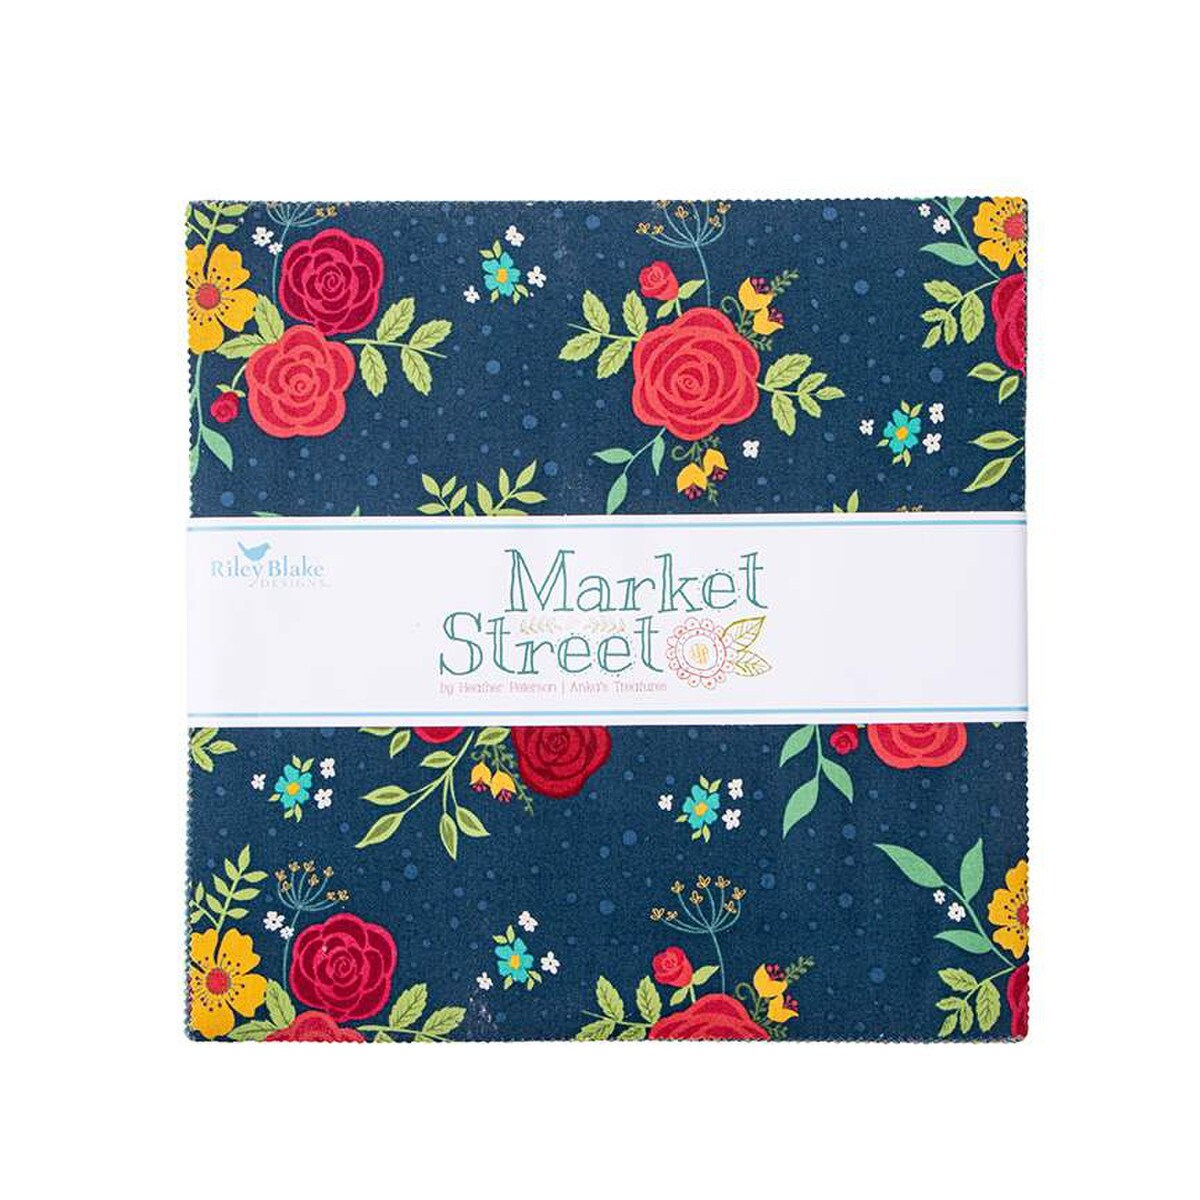 Market Street 10" Stacker Layer Cake - Riley Blake Designs 10-14120-42, Red Blue Yellow Floral Fabric Layer Cake